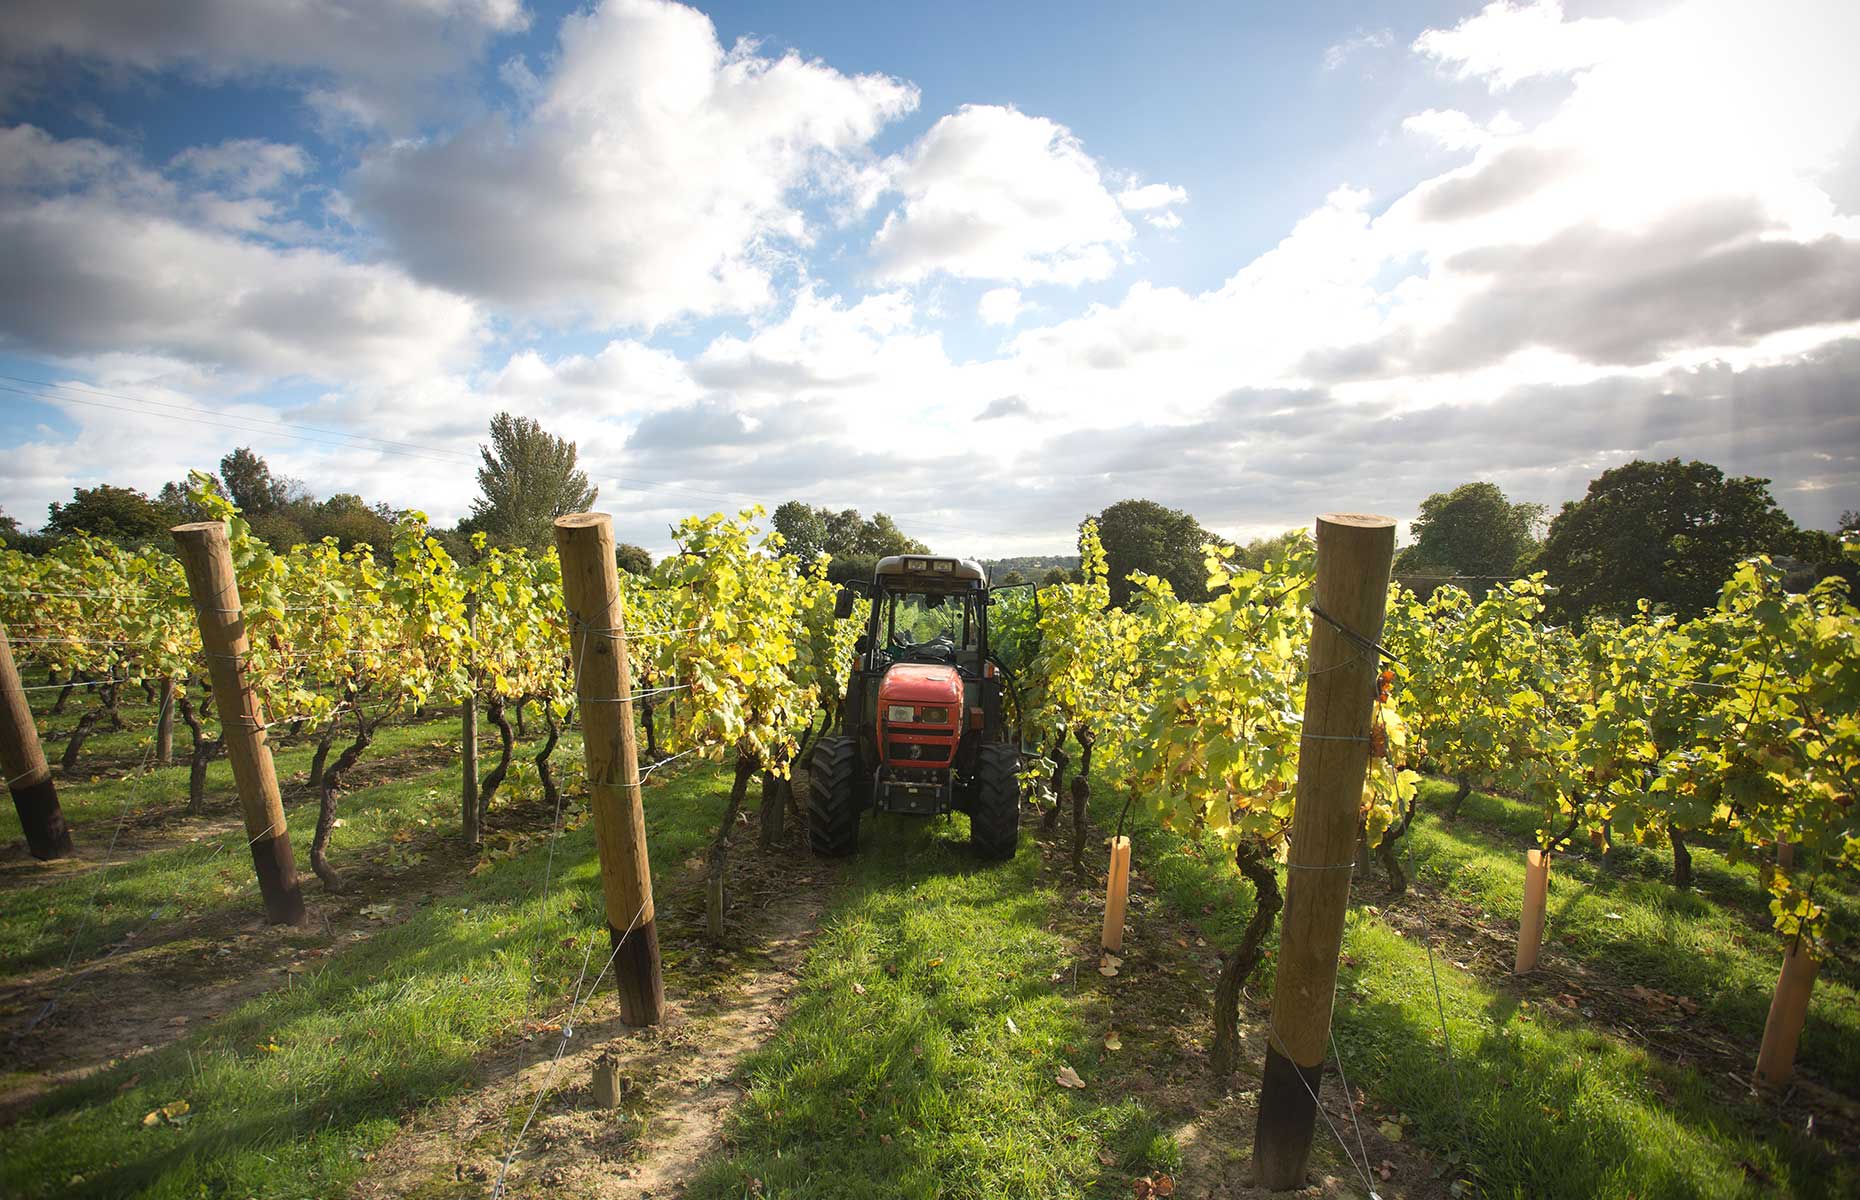 Chapel Down vineyard with a tractor among the vines in the sun (Image: Jeff Gilbert/Alamy Stock Photo)